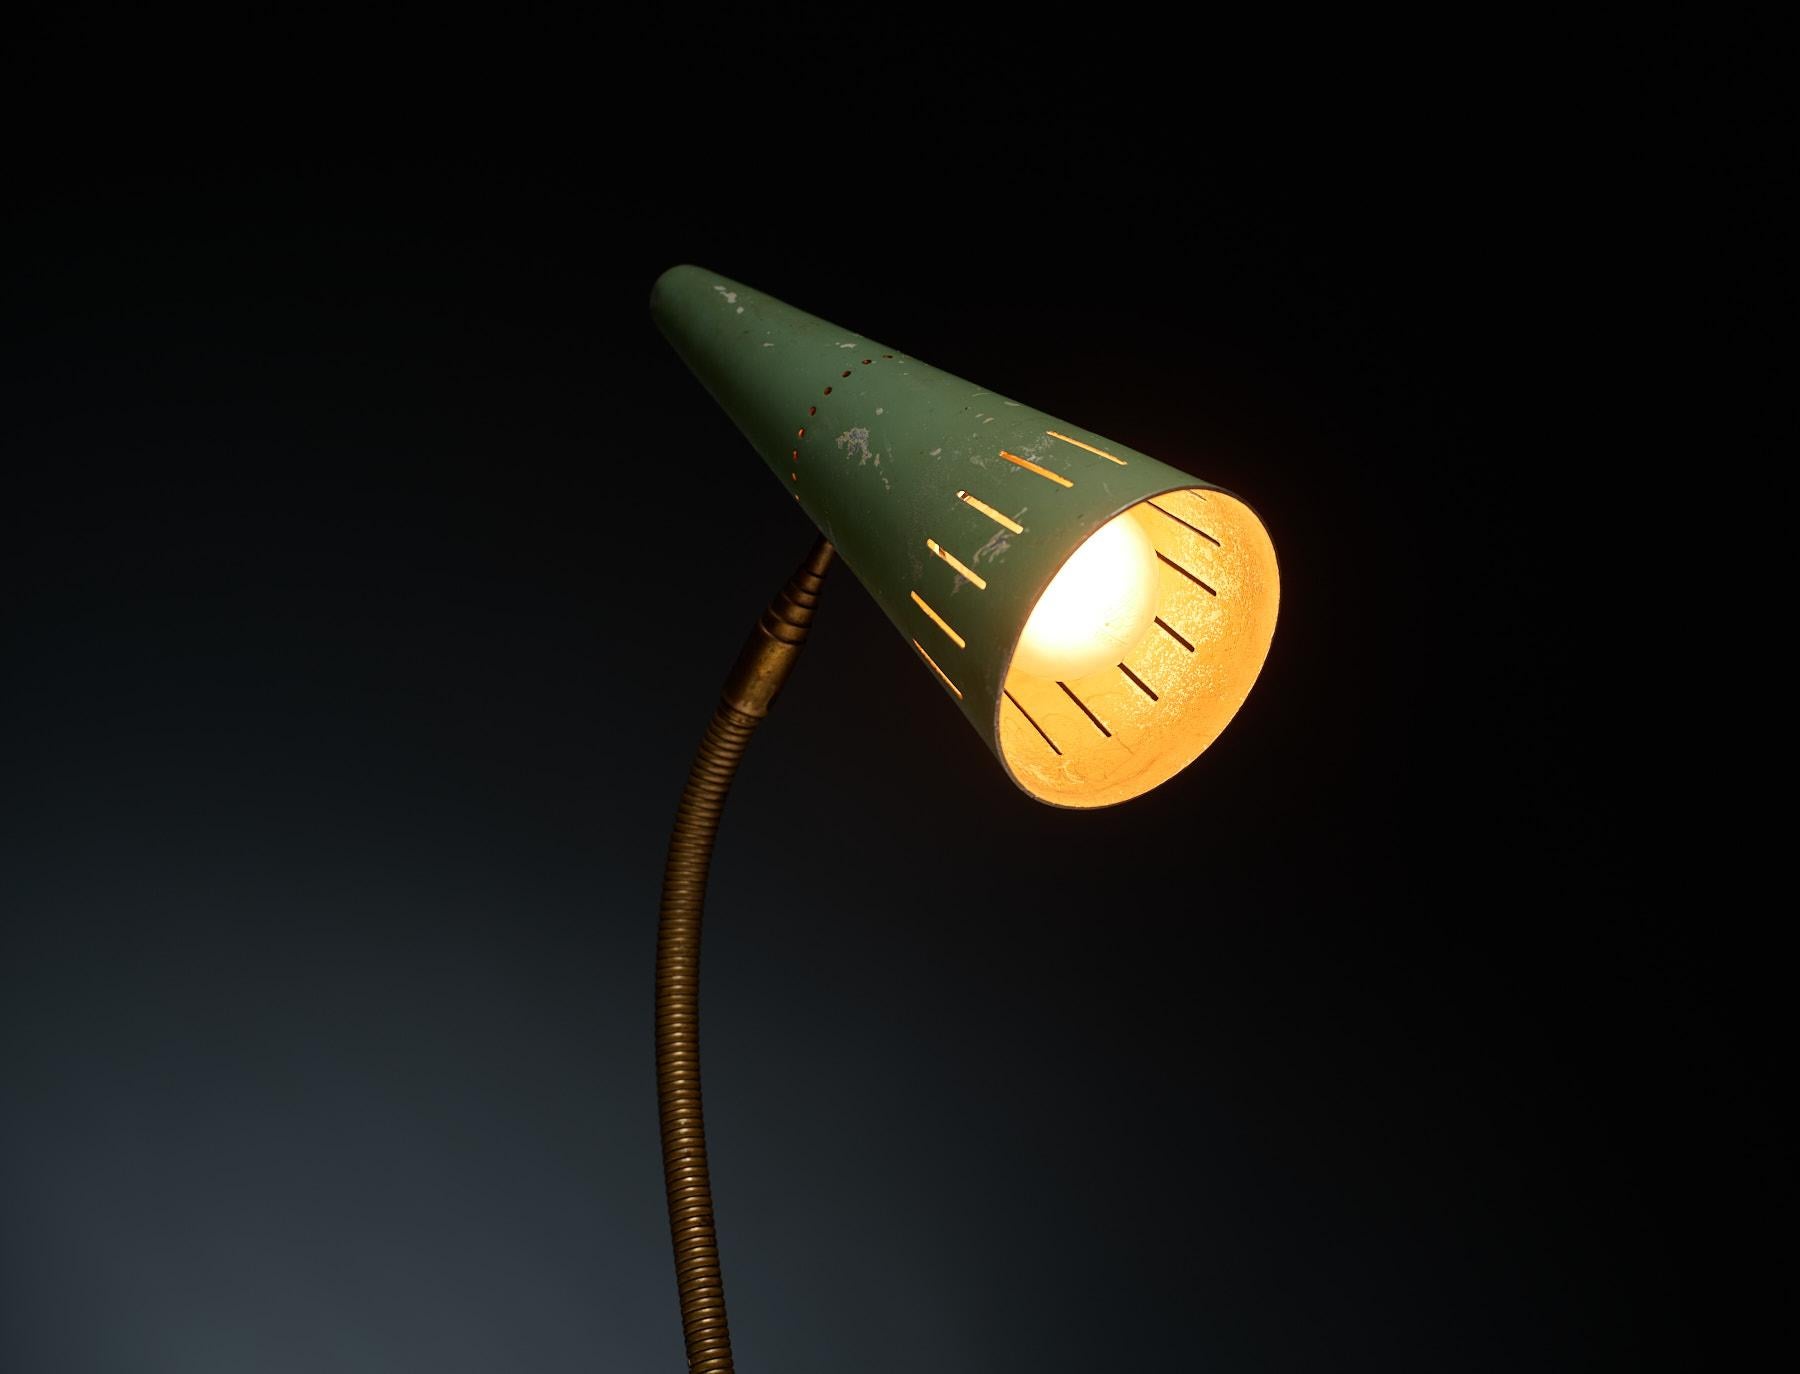 Mid-20th Century Vintage Italian Table Lamp - 1950s Design with Green Lacquered Metal Shade